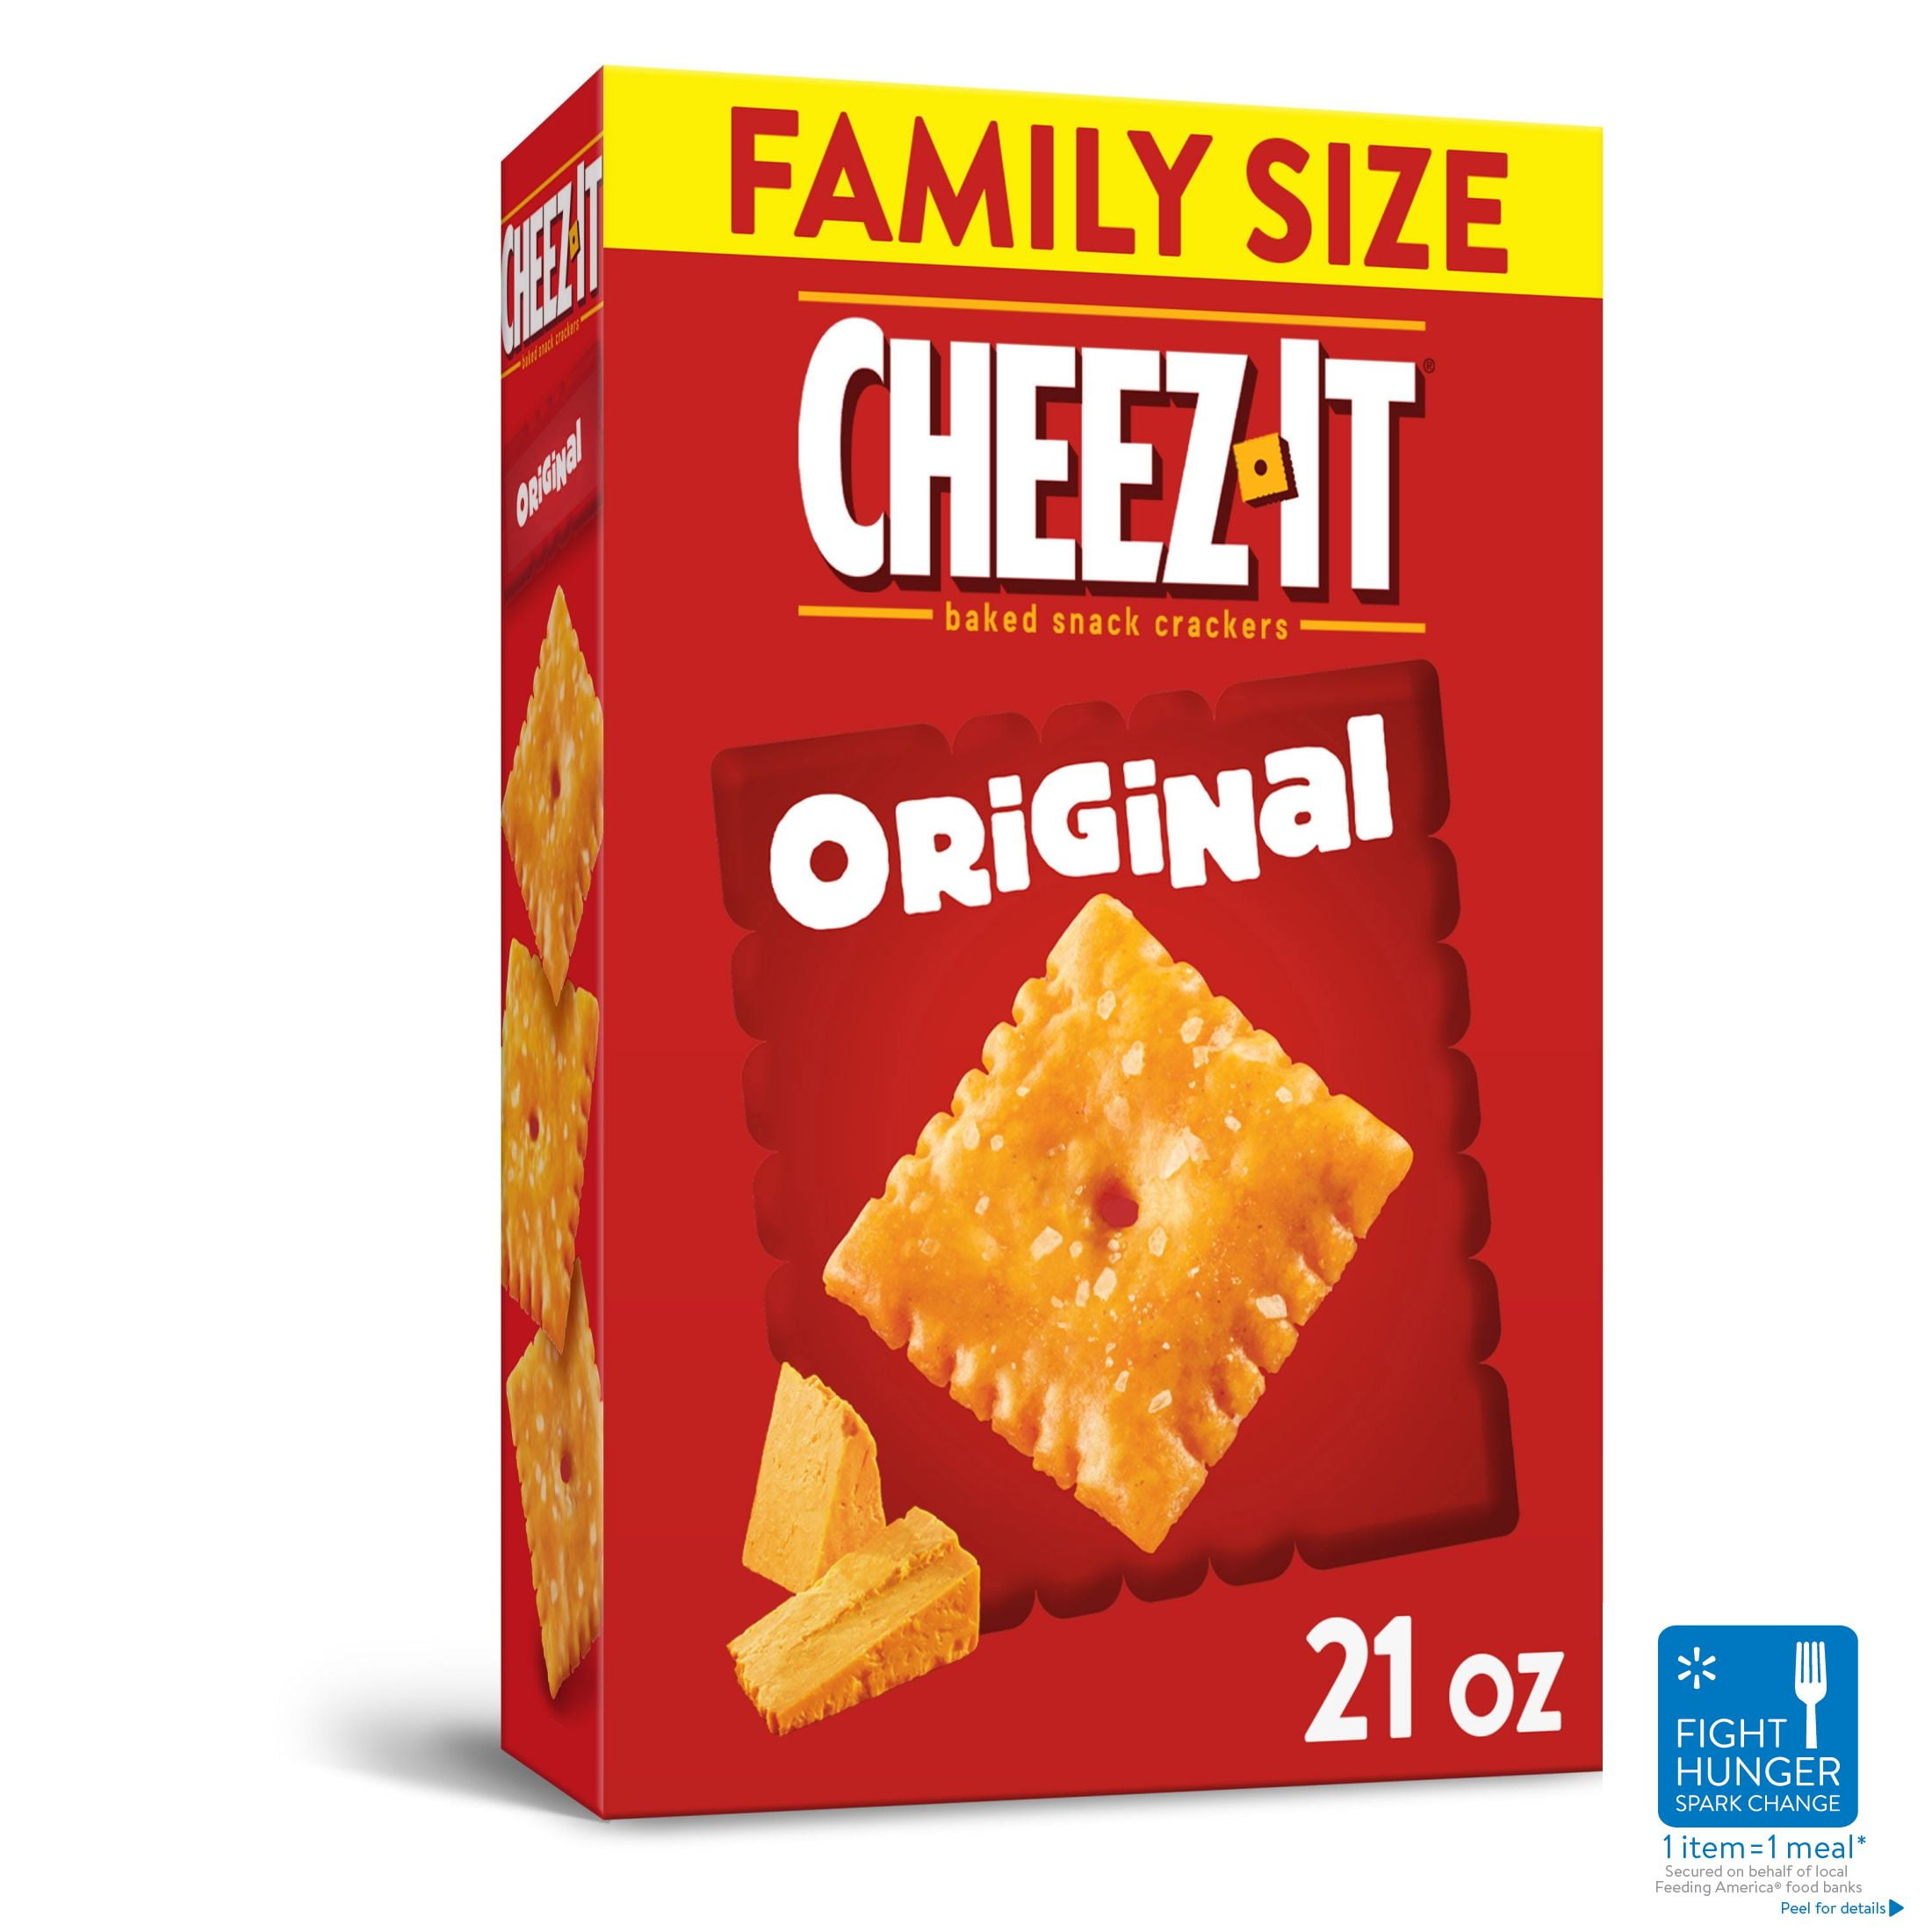 Cheez-It Original Baked Cheese Crackers, 21 oz